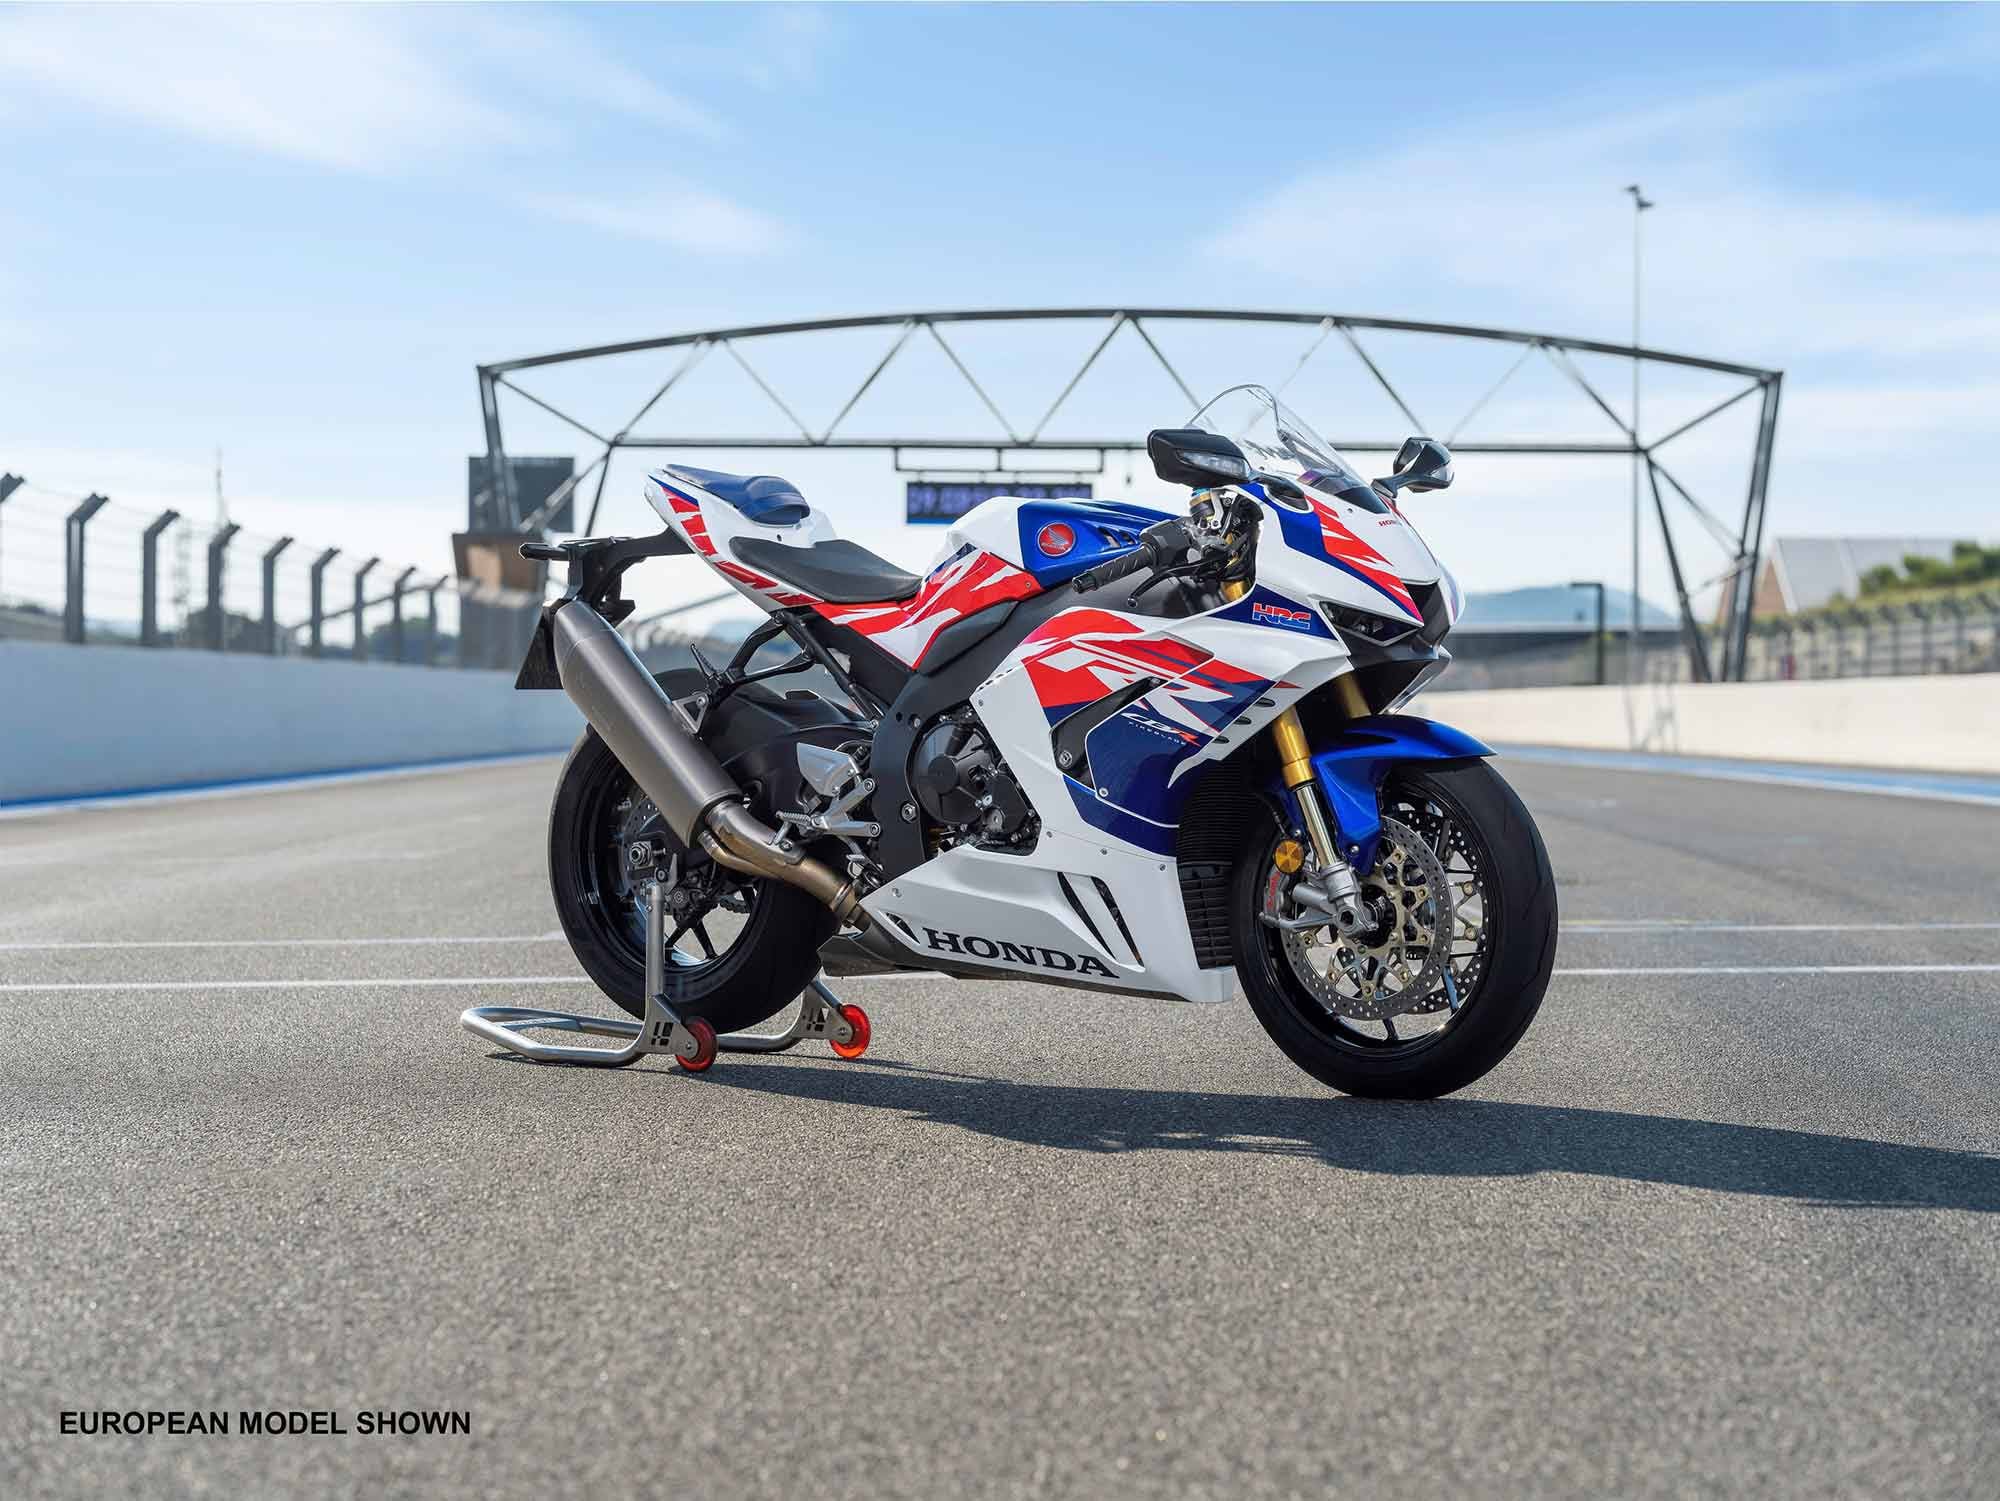 The Honda CBR1000RR-R Fireblade SP remains an appealing superbike option in 2023.